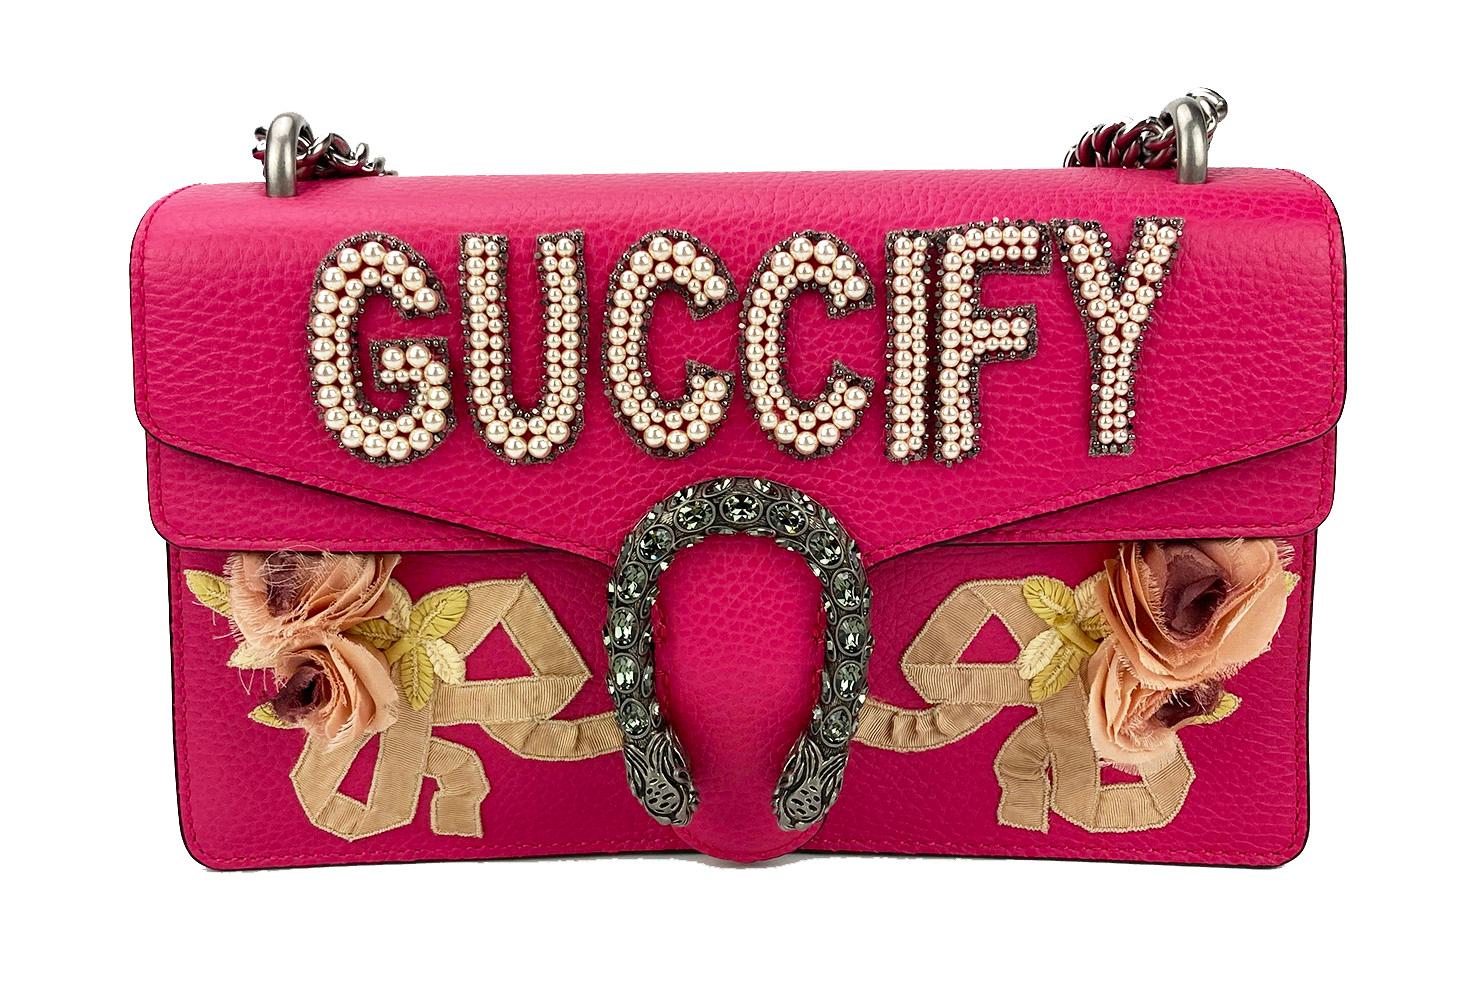 Gucci Dionysus Pink Guccify Small Shoulder Bag in new unused condition. Pink pebbled leather exterior trimmed with antiqued silver hardware. Pearl and beaded 